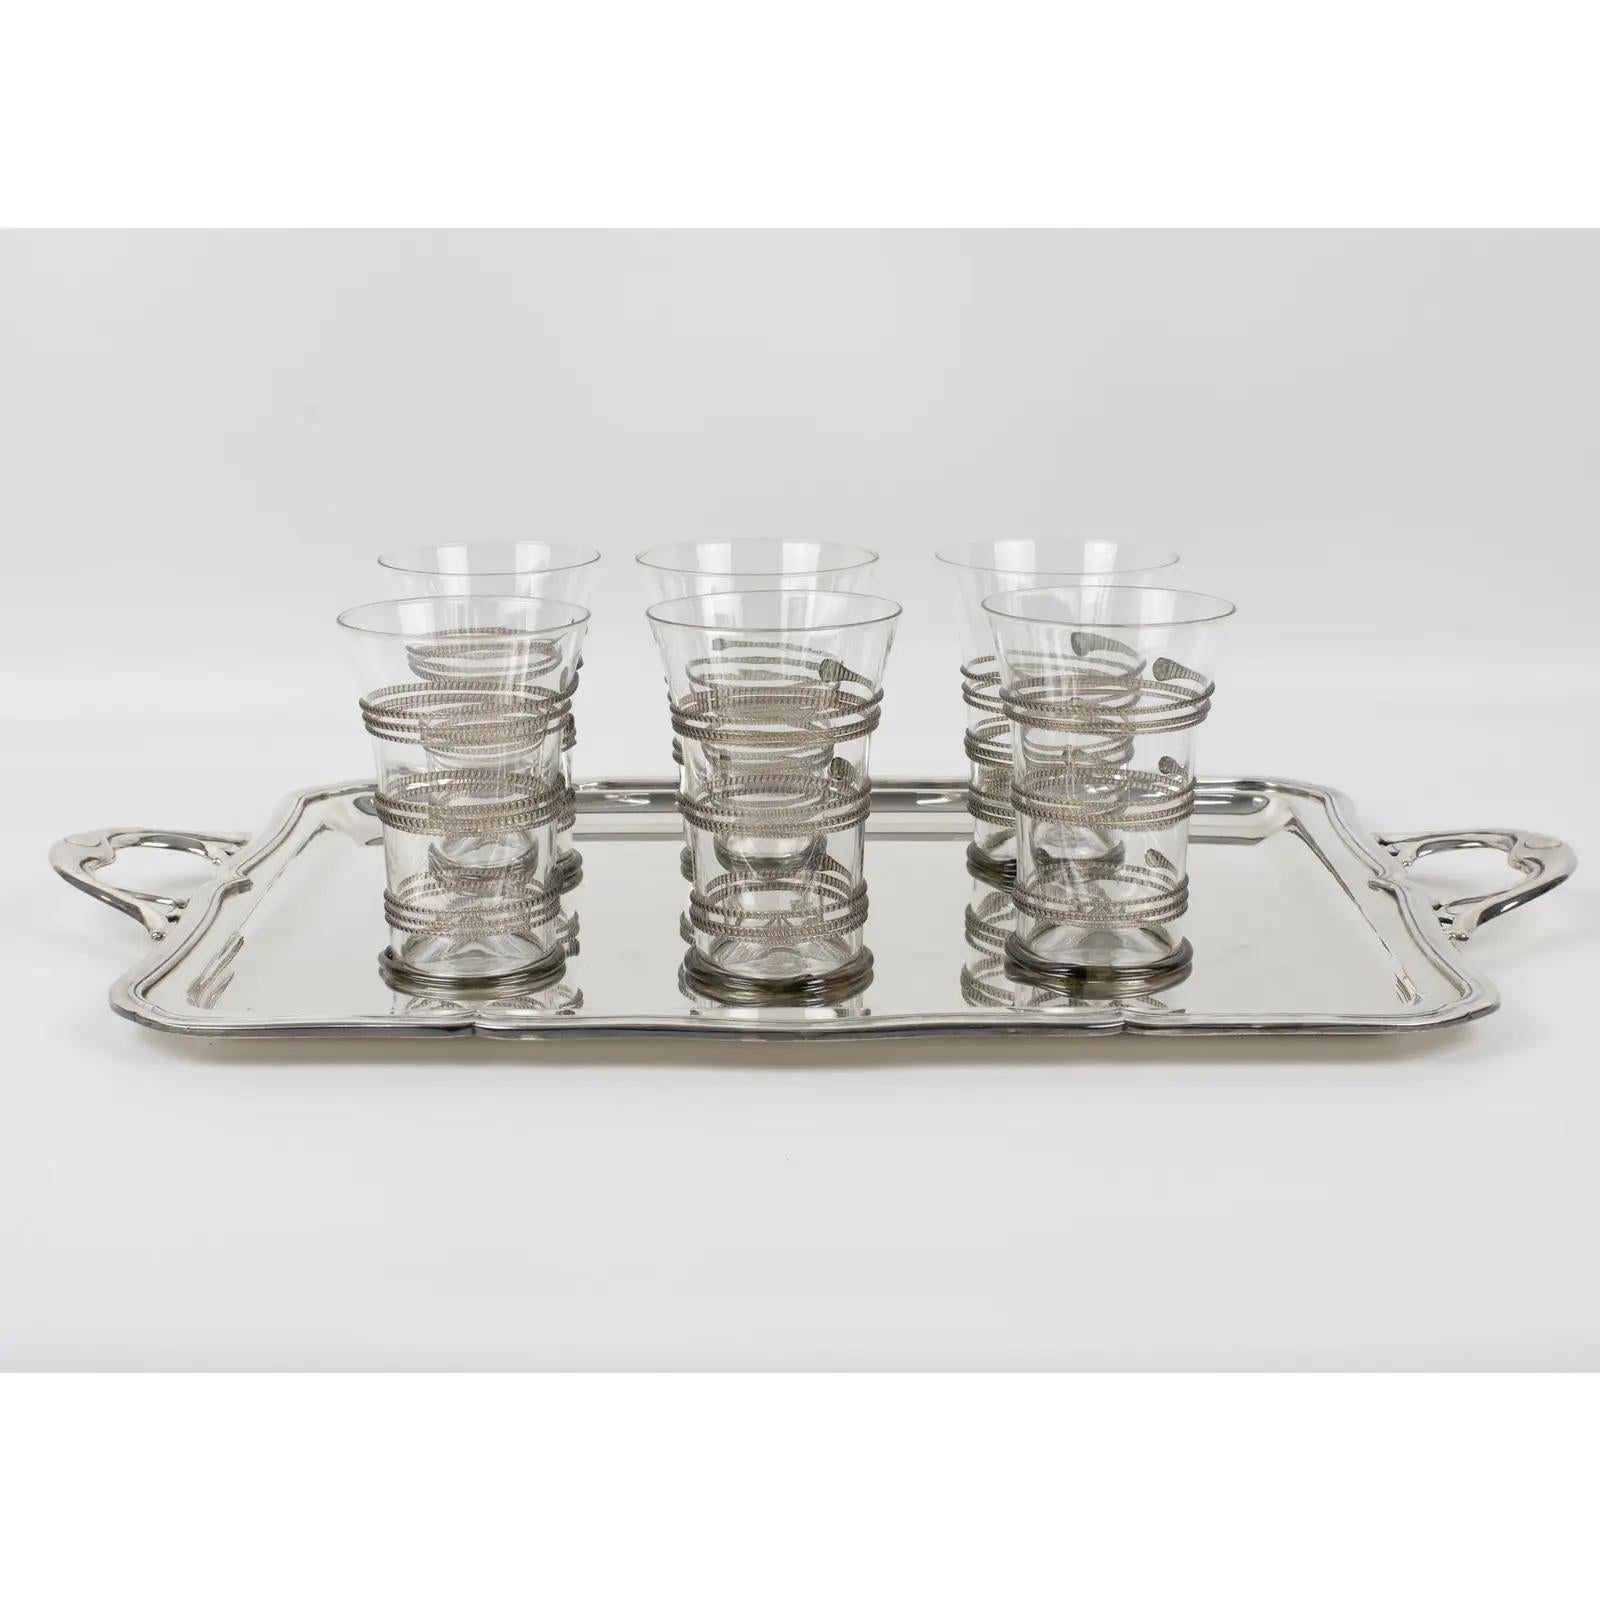 Mid-20th Century Modernist Alpaca Silver Plate Serving Barware Tray For Sale